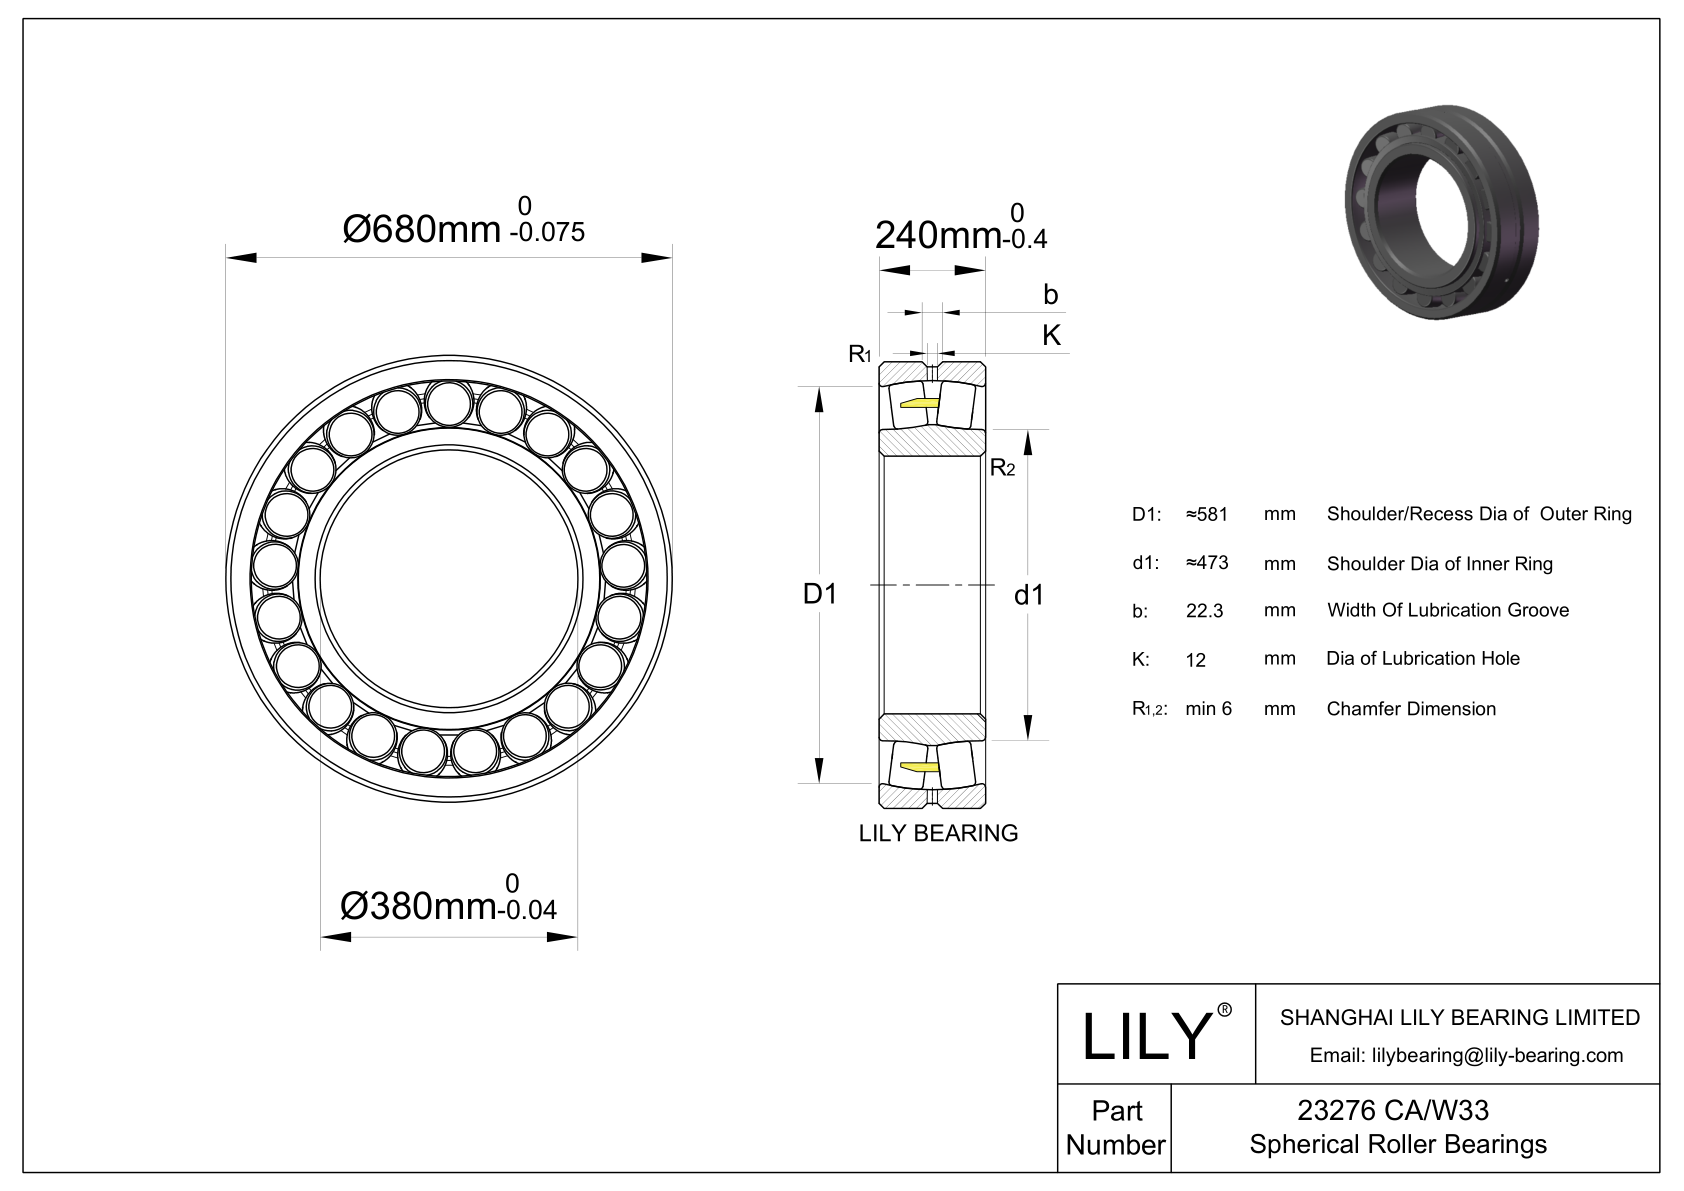 23276 CA/W33 Double Row Spherical Roller Bearing cad drawing